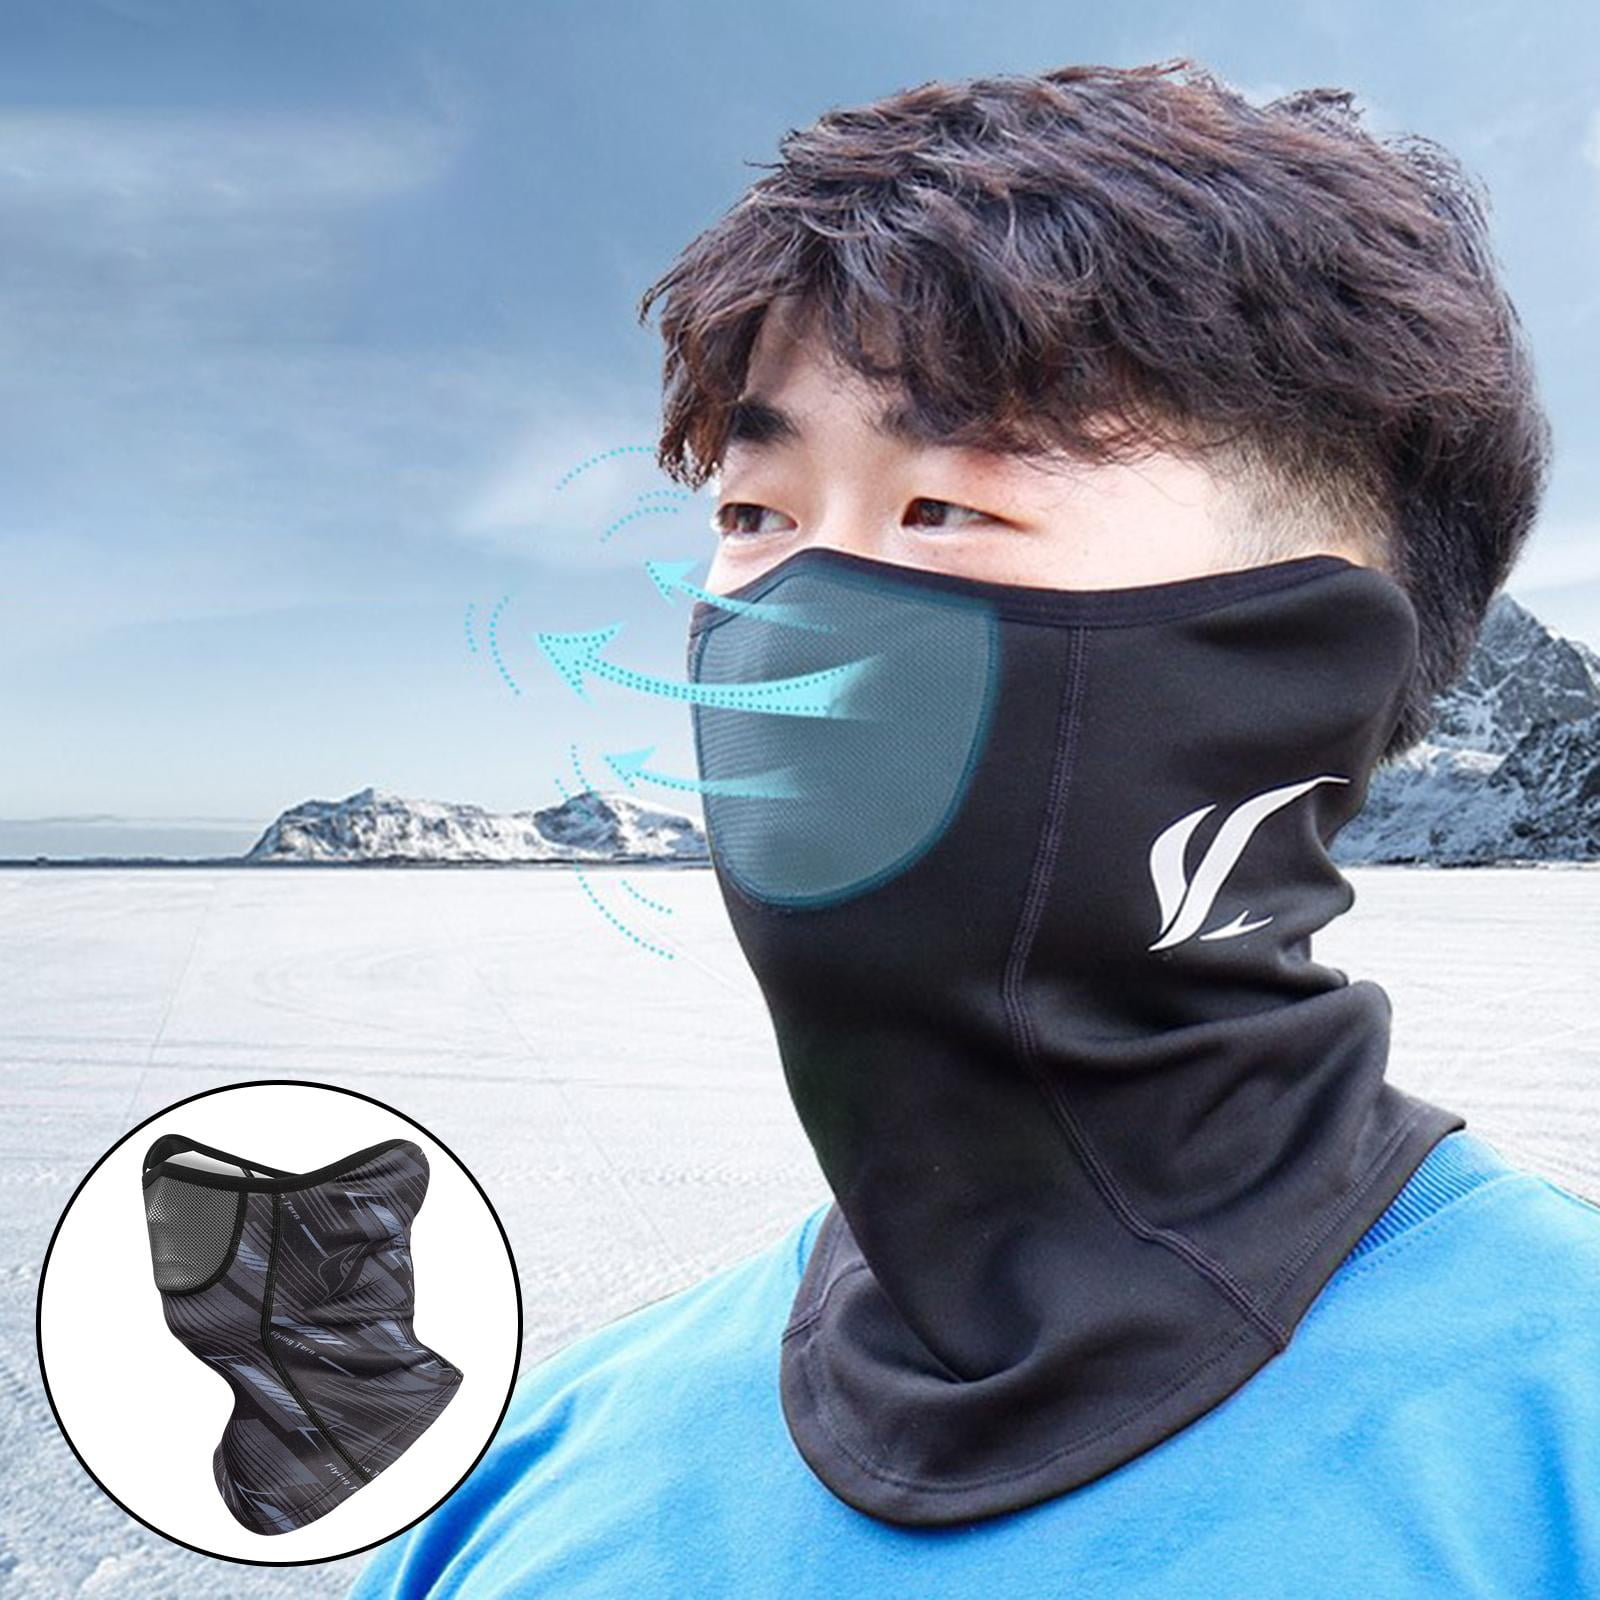 Winter Cycling Half Balaclava Face Mask Ear Protection Nose Breathable Windproof Mask Neck Tube With Earloop Ventilating Bandana for Motorcycling Skiing Snowboarding Unisex 